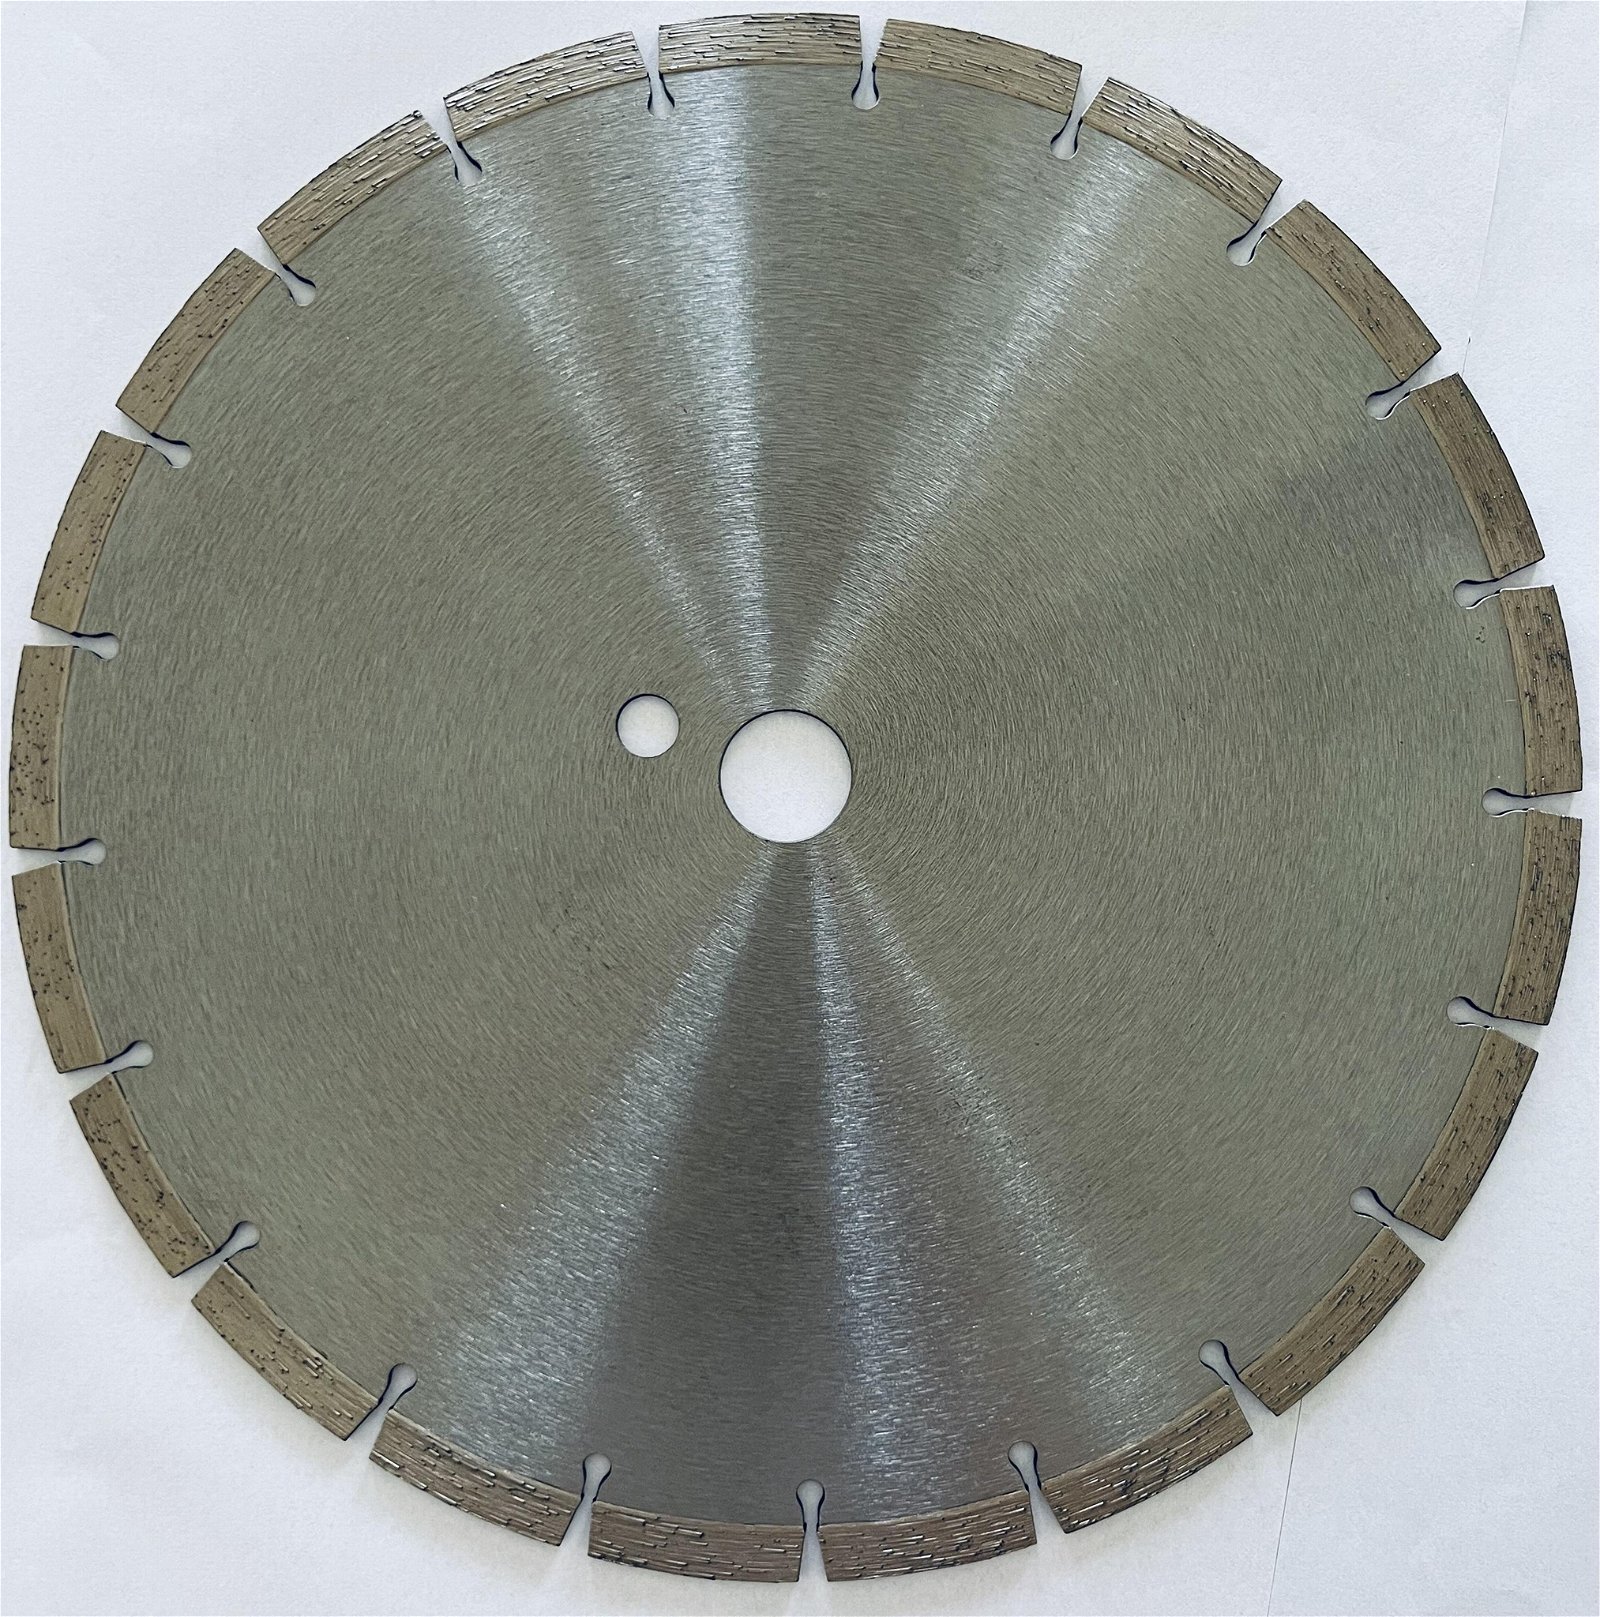 diamond saw blade for cutting concrete and stone